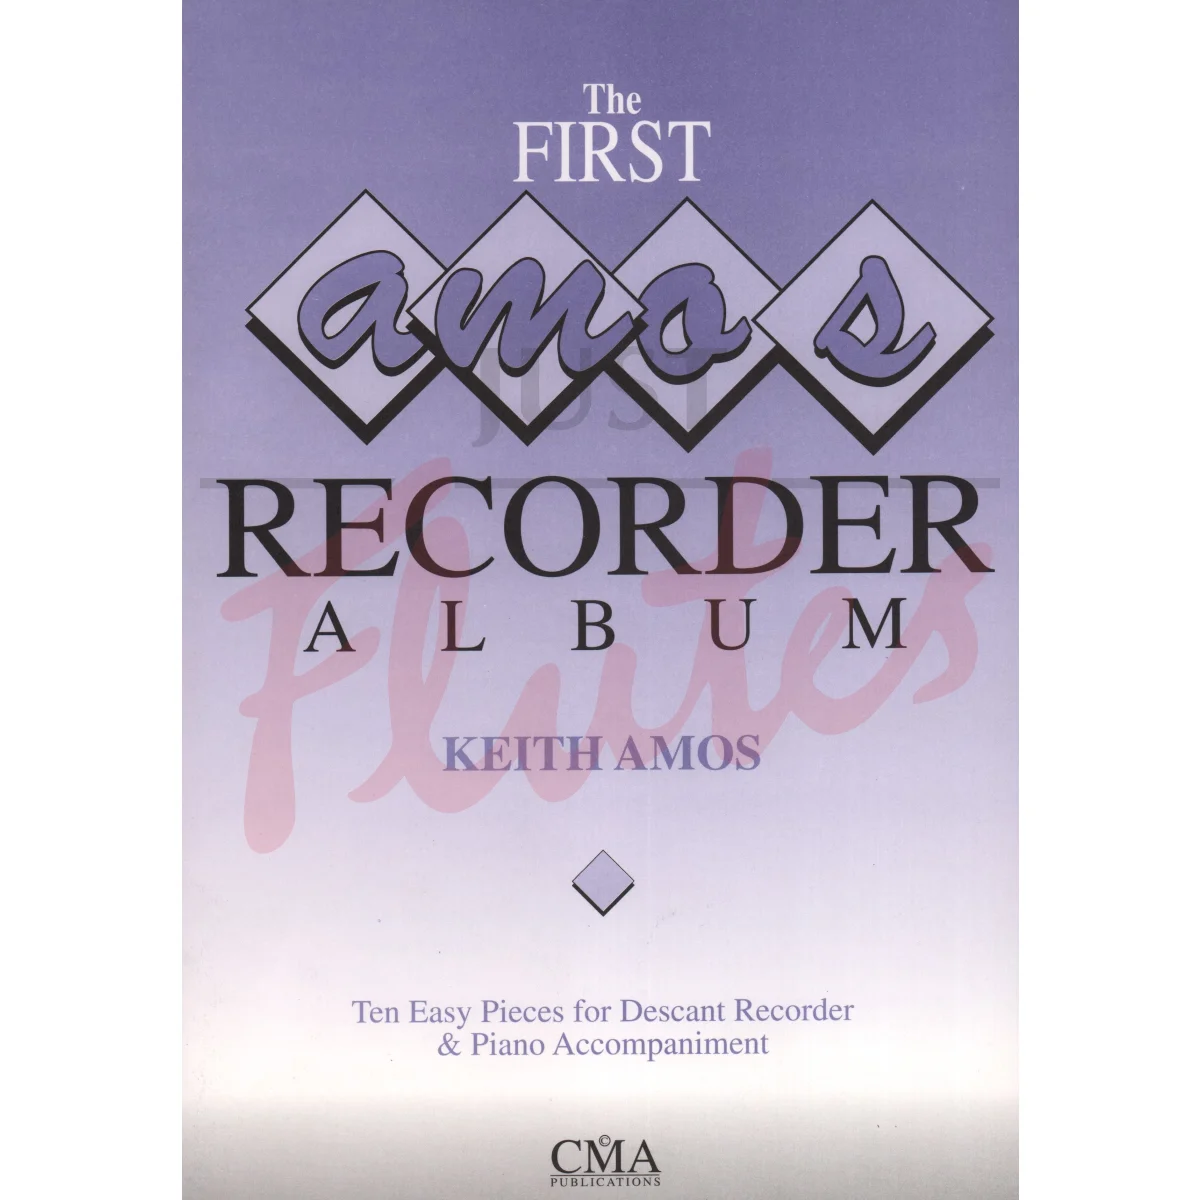 The First Amos Recorder Album 